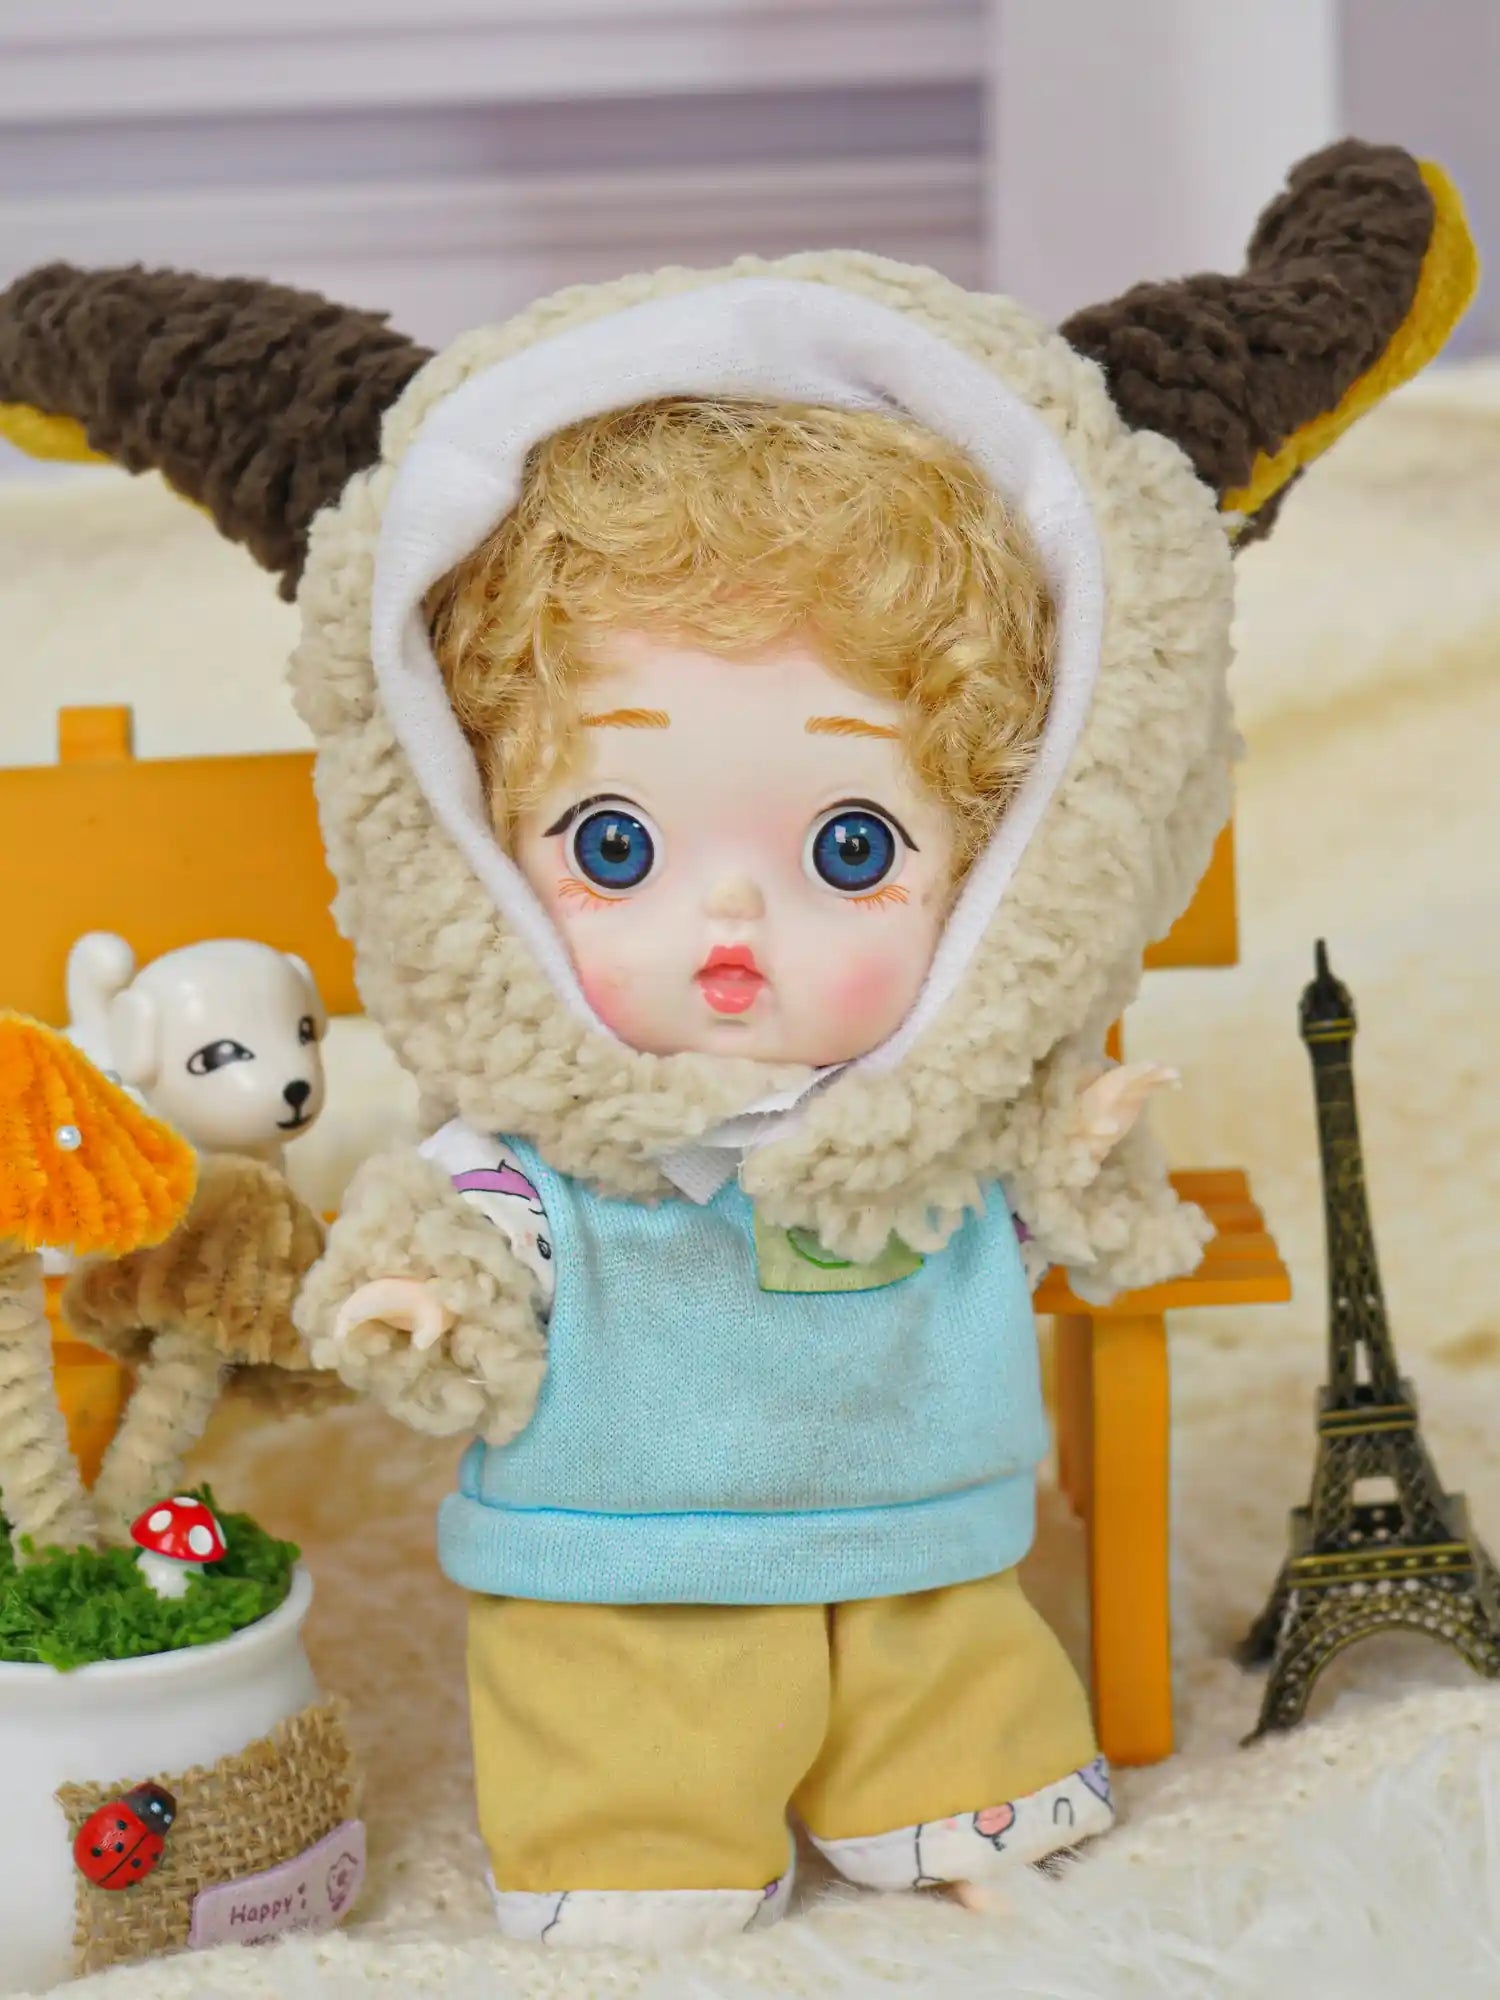 The BJD's captivating blue eyes shine from beneath a lamb's hood, with a miniature world around it.